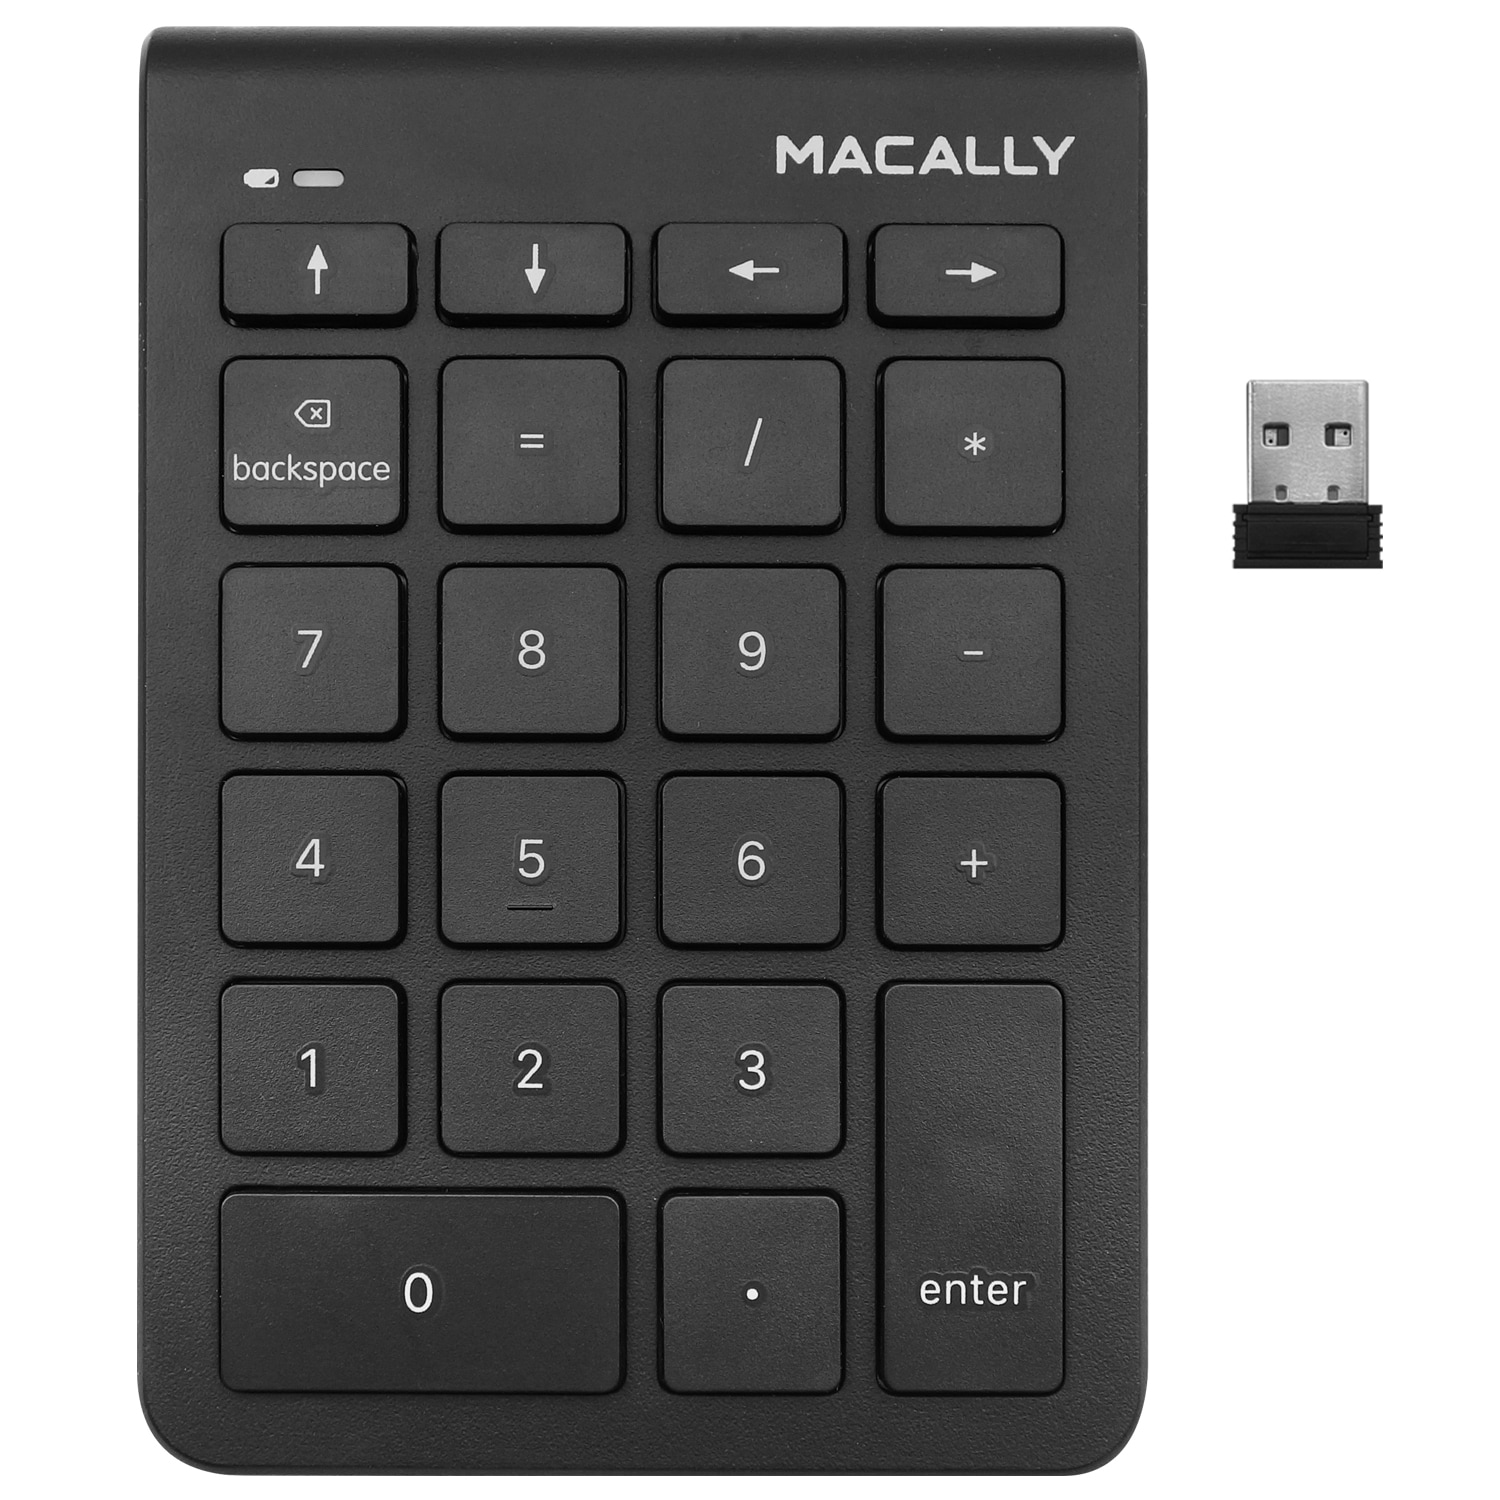 Macally Macally 2.4g Wireless Numeric Keypad Keyboard For Laptop, Apple Mac Imac Macbook Pro/air, Windows Pc, or Desktop Computer with Usb Receiver 22 Key Number Pad Numerical Numpad- Black in the